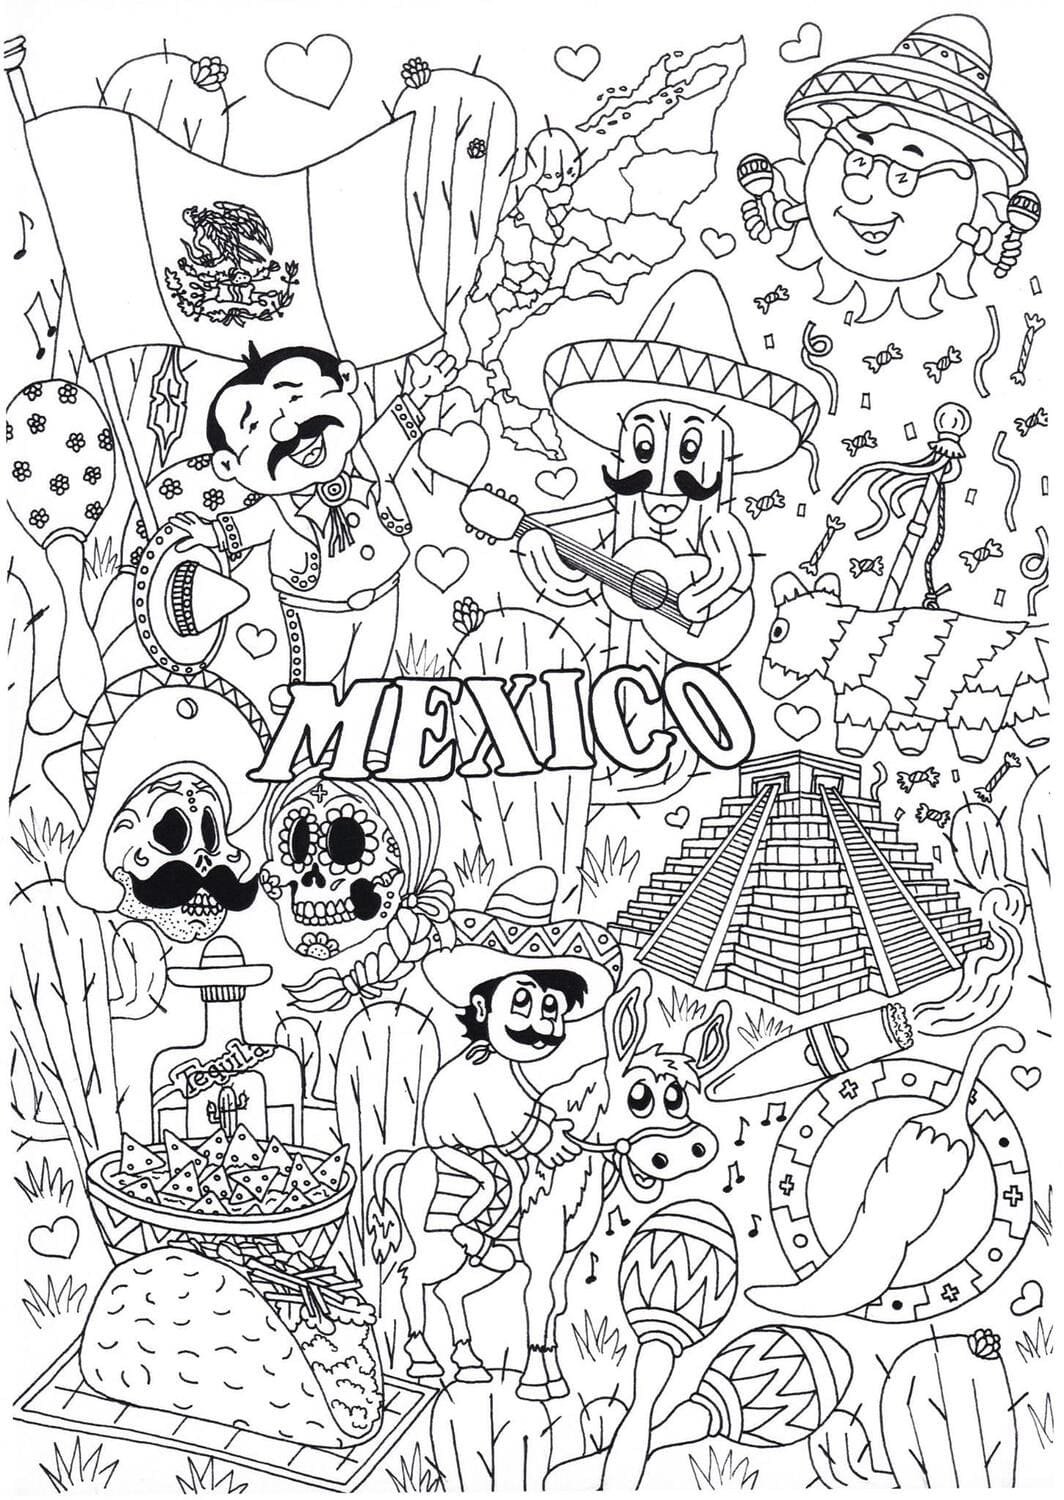 Mexico coloring pages printable for free download